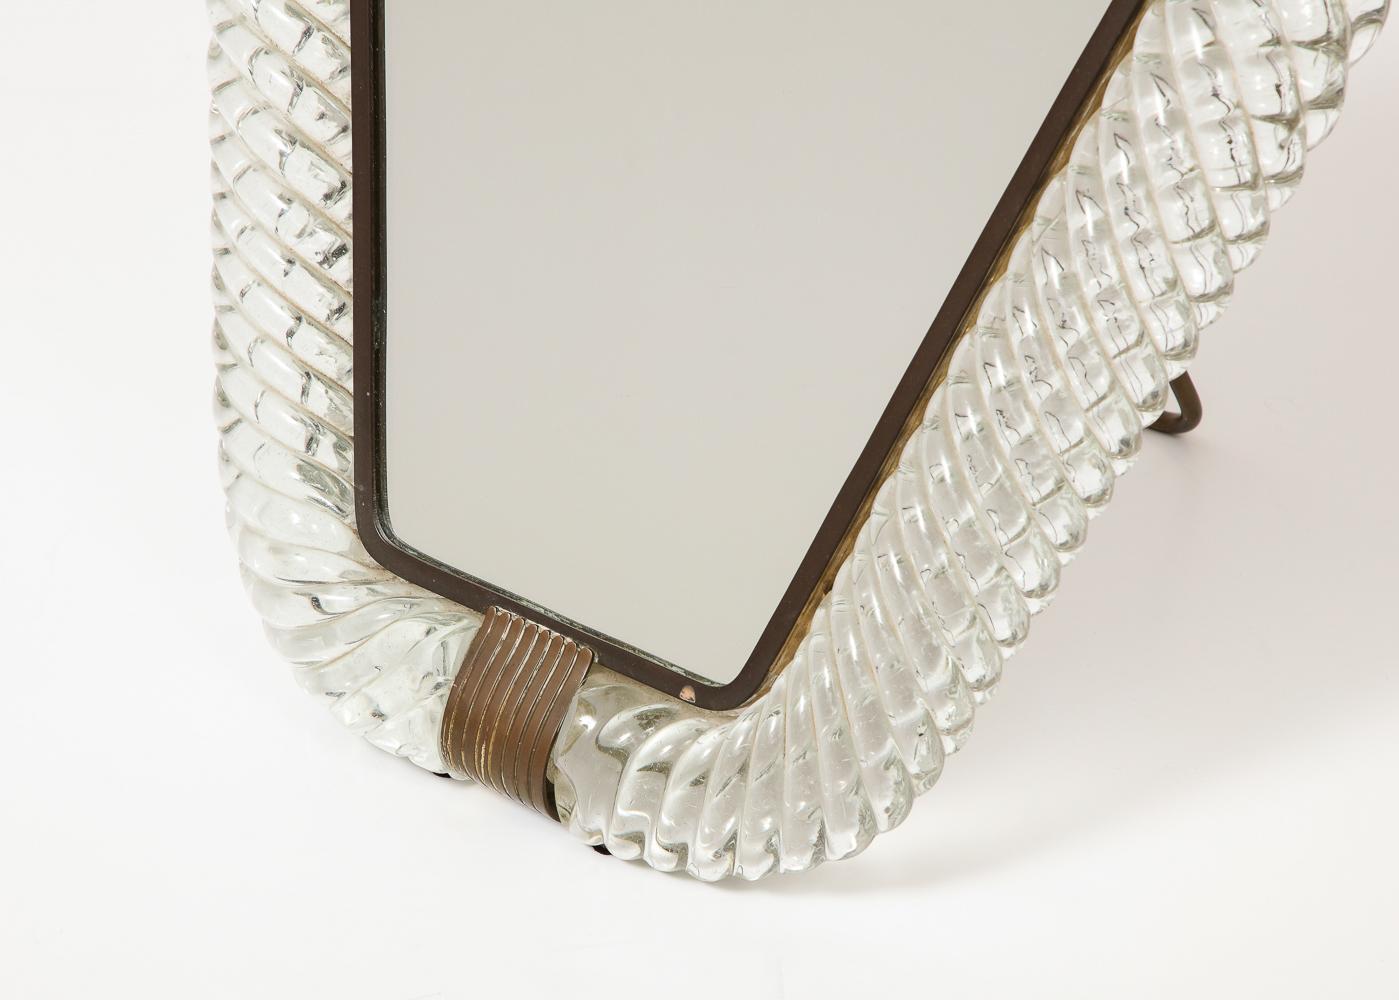 Hand-Crafted Murano Glass Table Mirror by Barovier & Toso For Sale